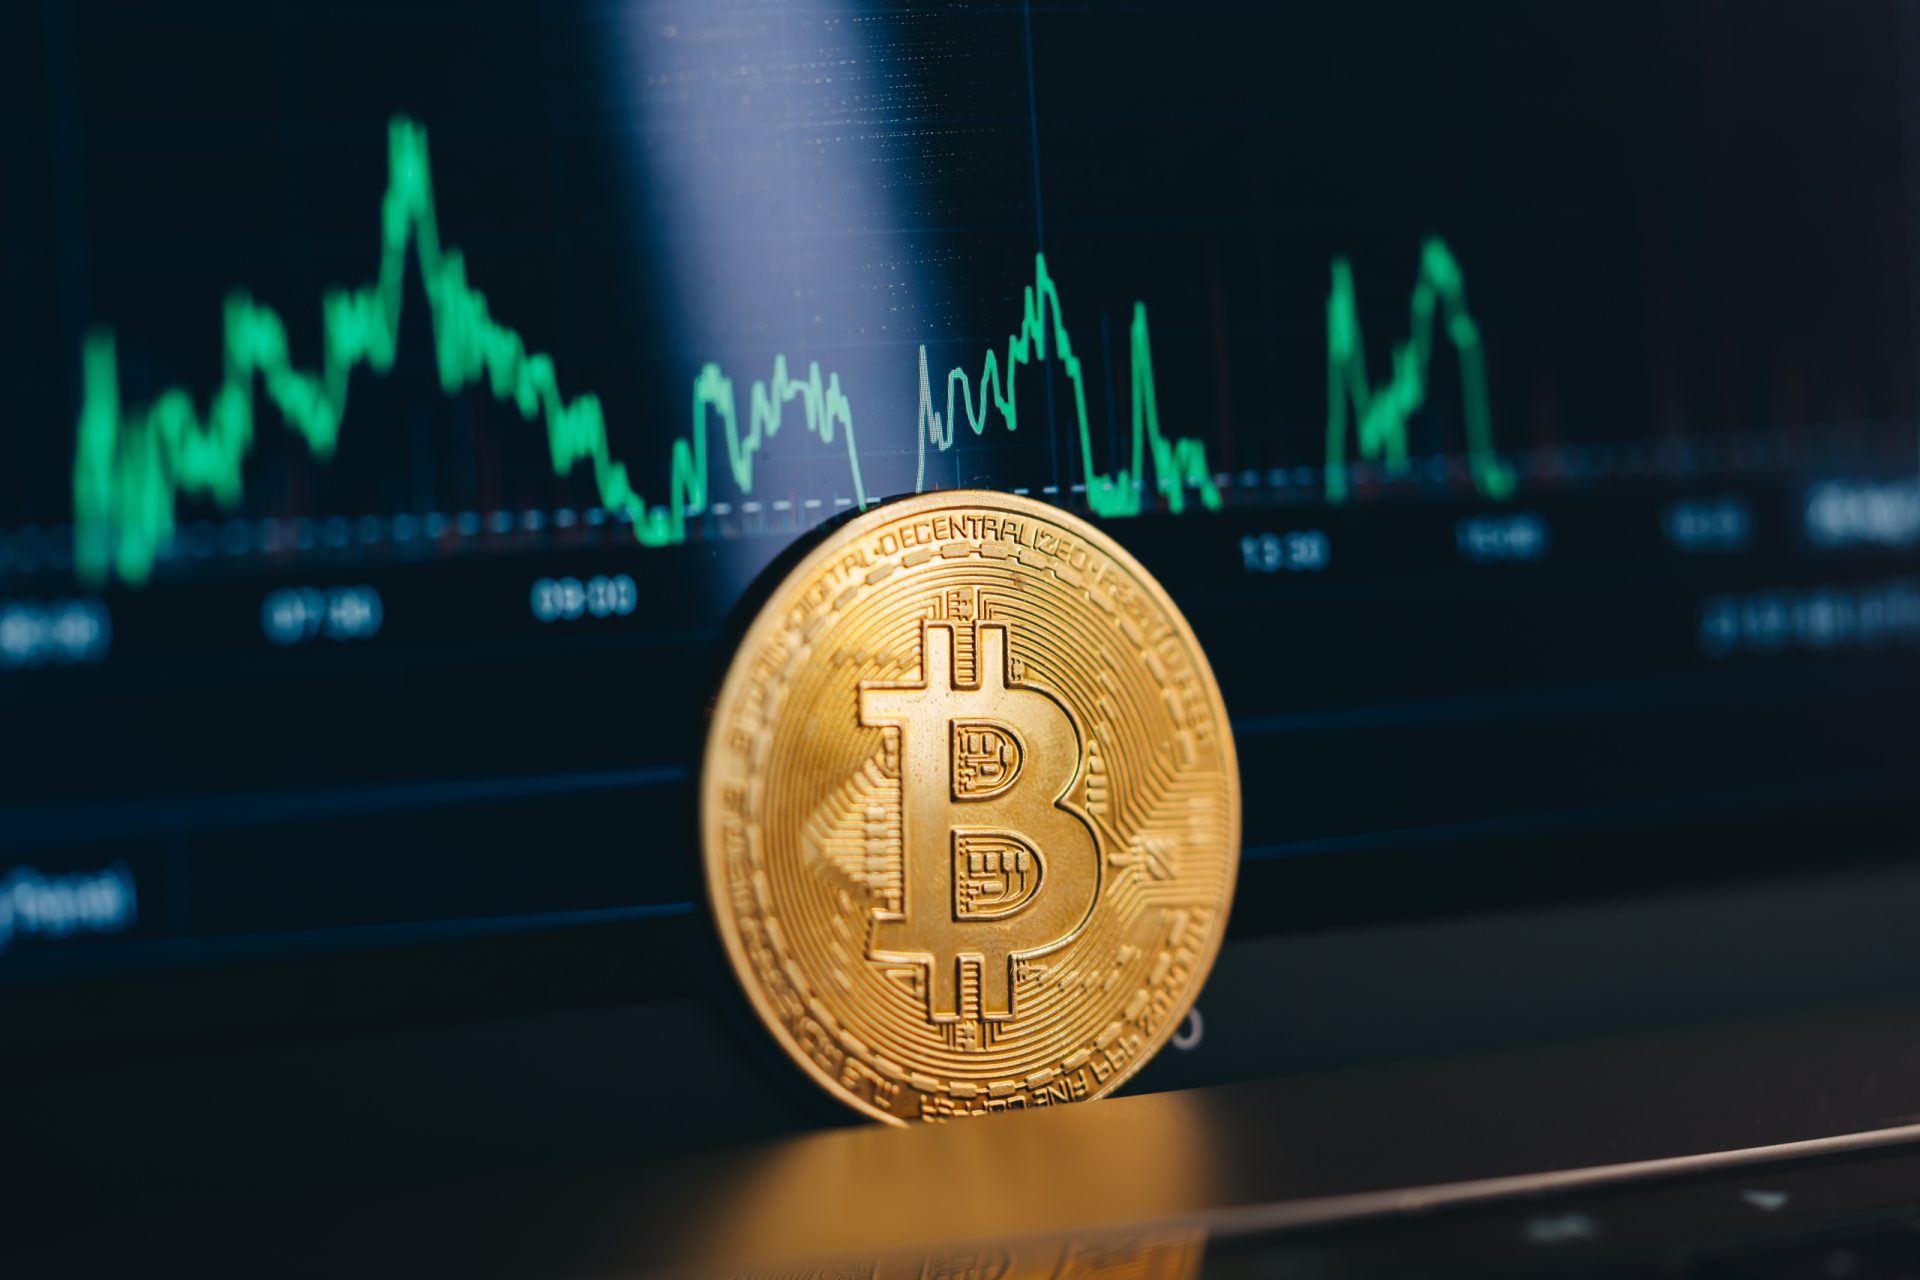 Excitement Around Bitcoin ETF Grows: ProShares' BITO Sees Largest Annual Capital Inflow
